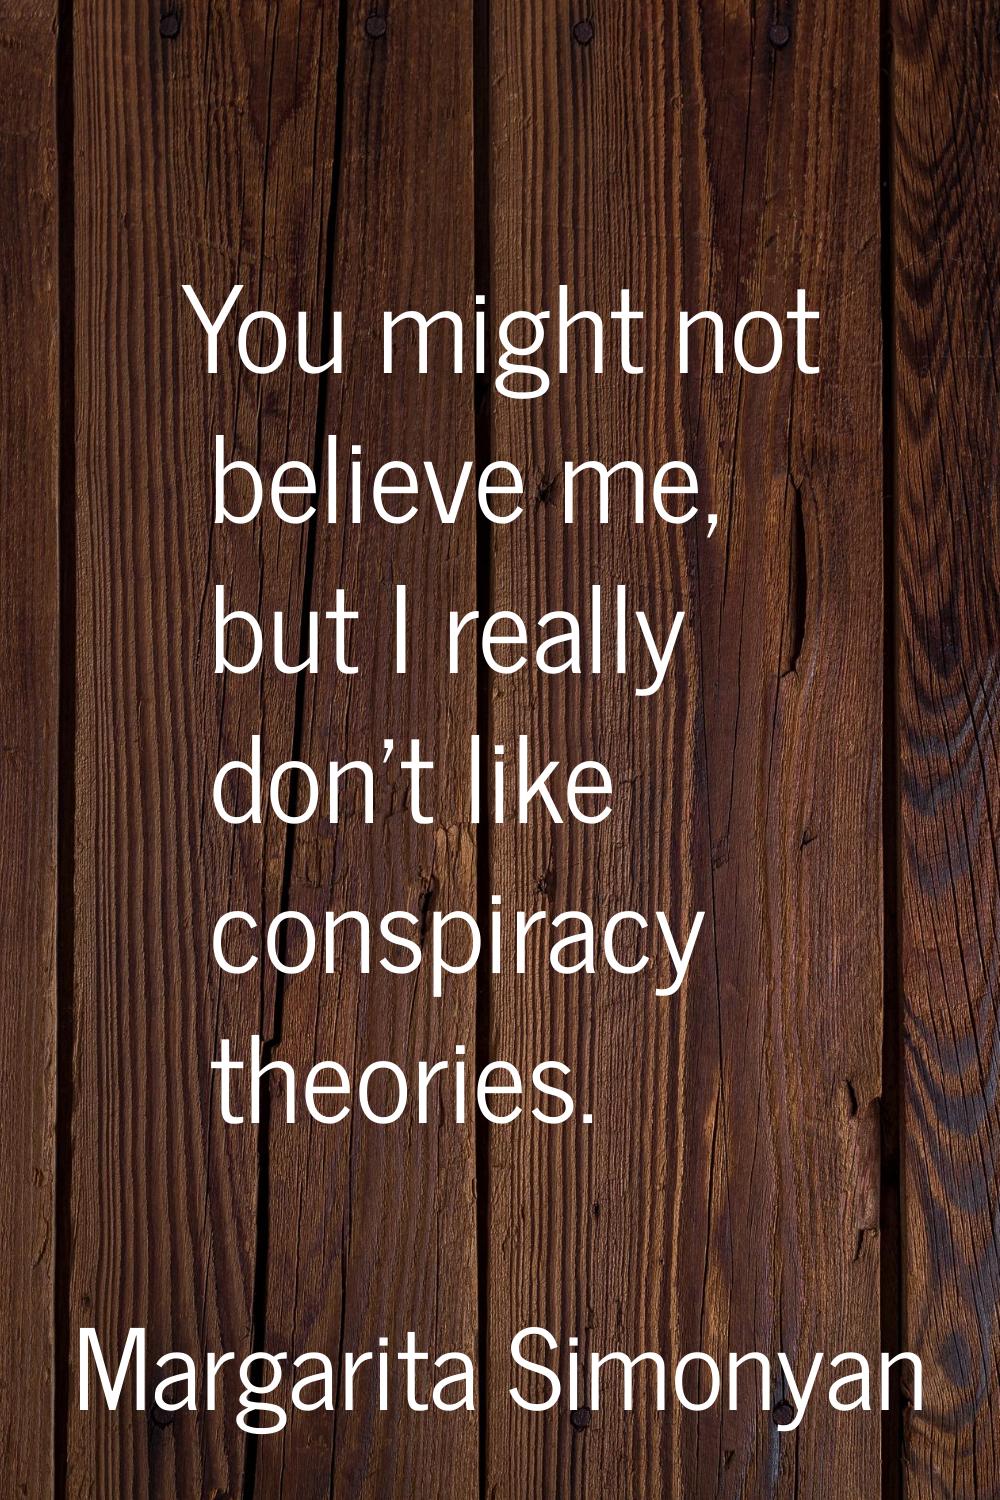 You might not believe me, but I really don't like conspiracy theories.